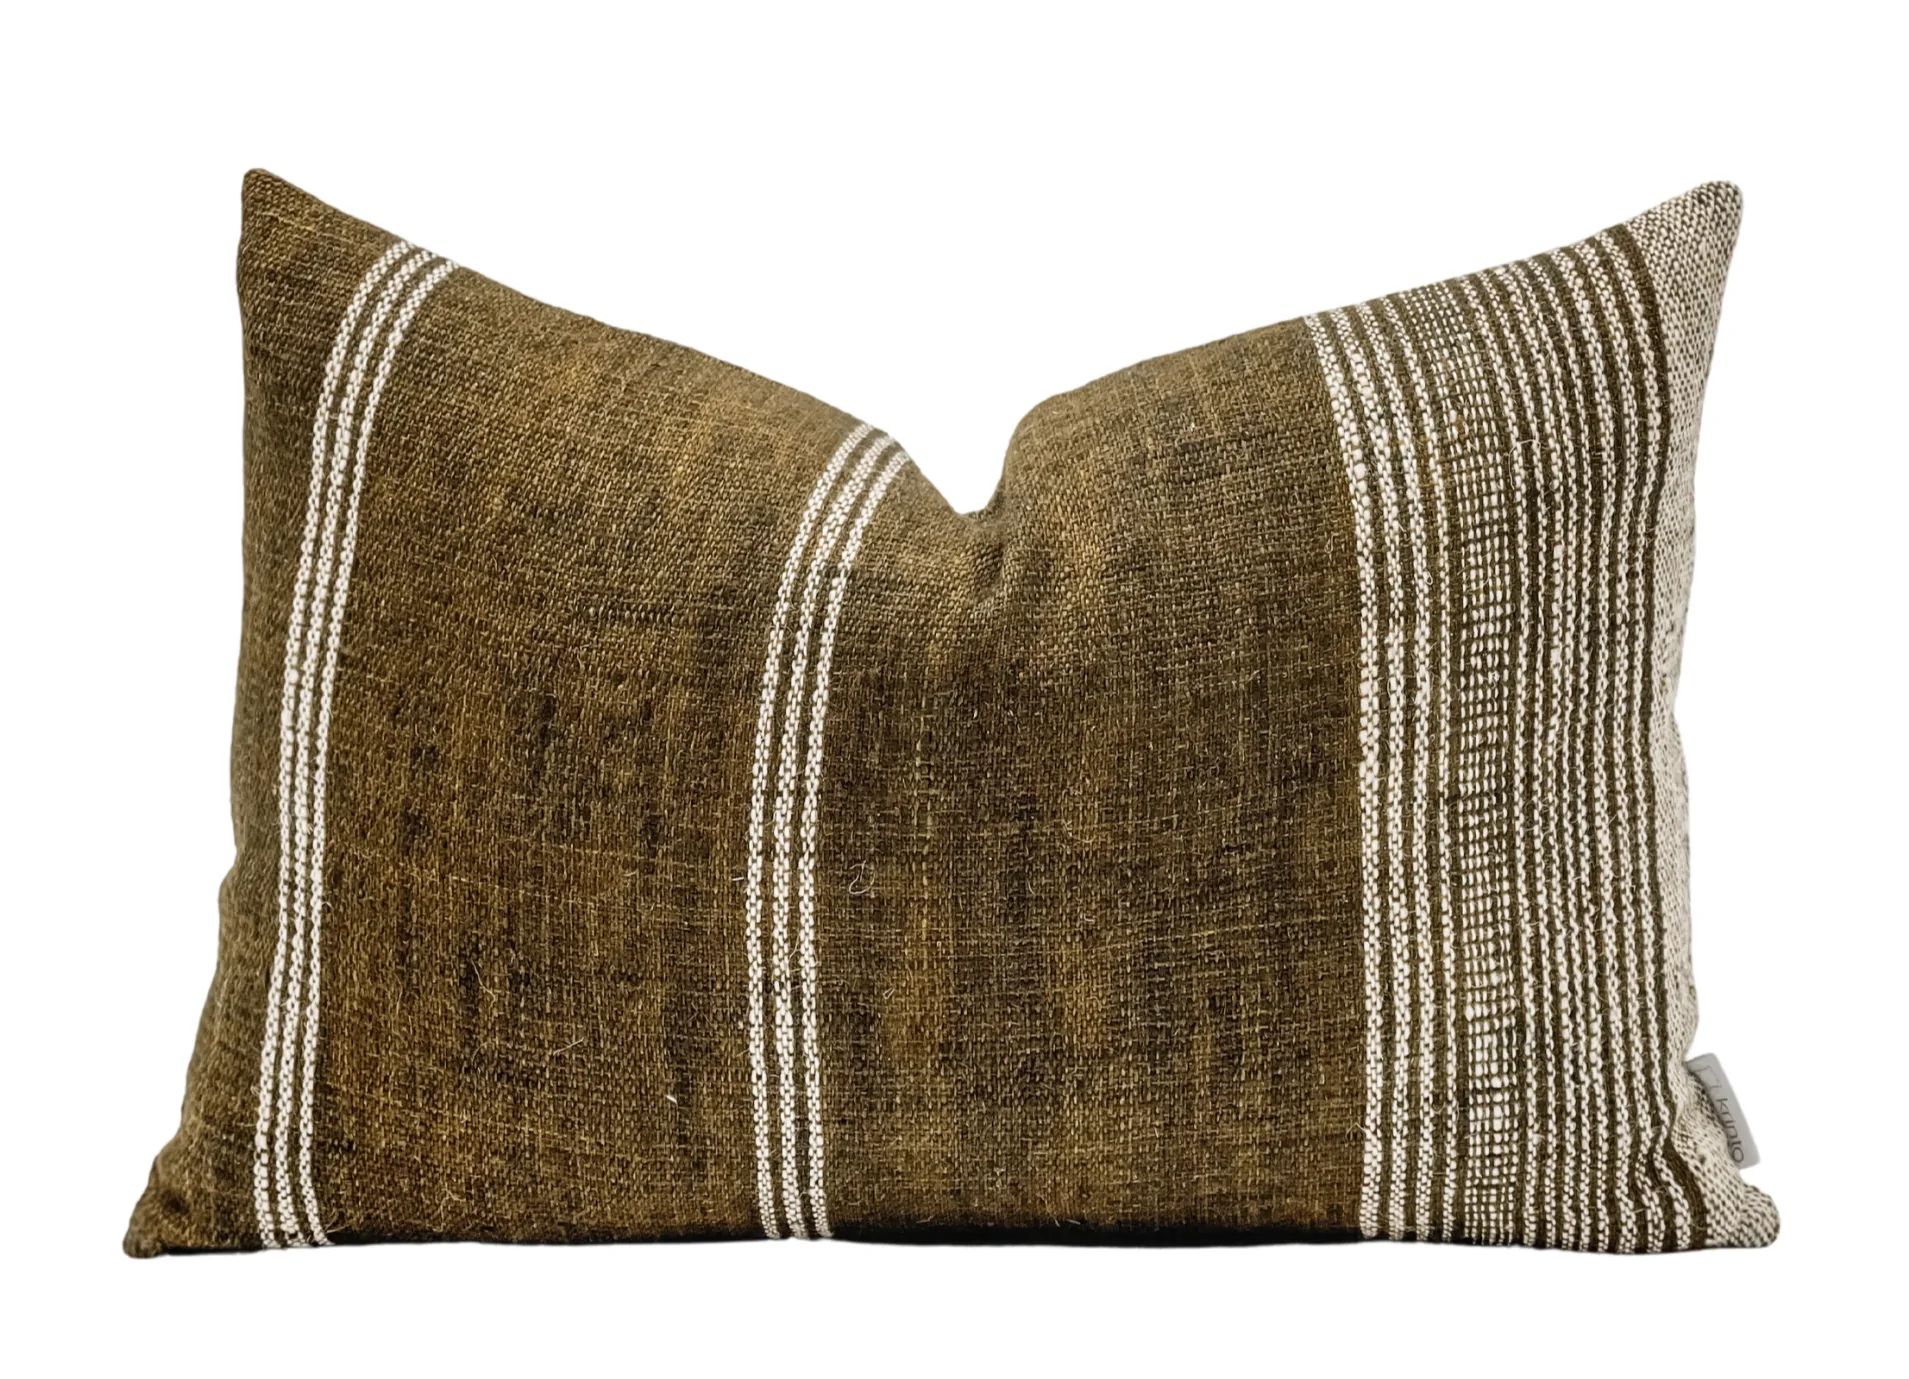 DARK BROWN INDIAN WOOL PILLOW COVER | Krinto